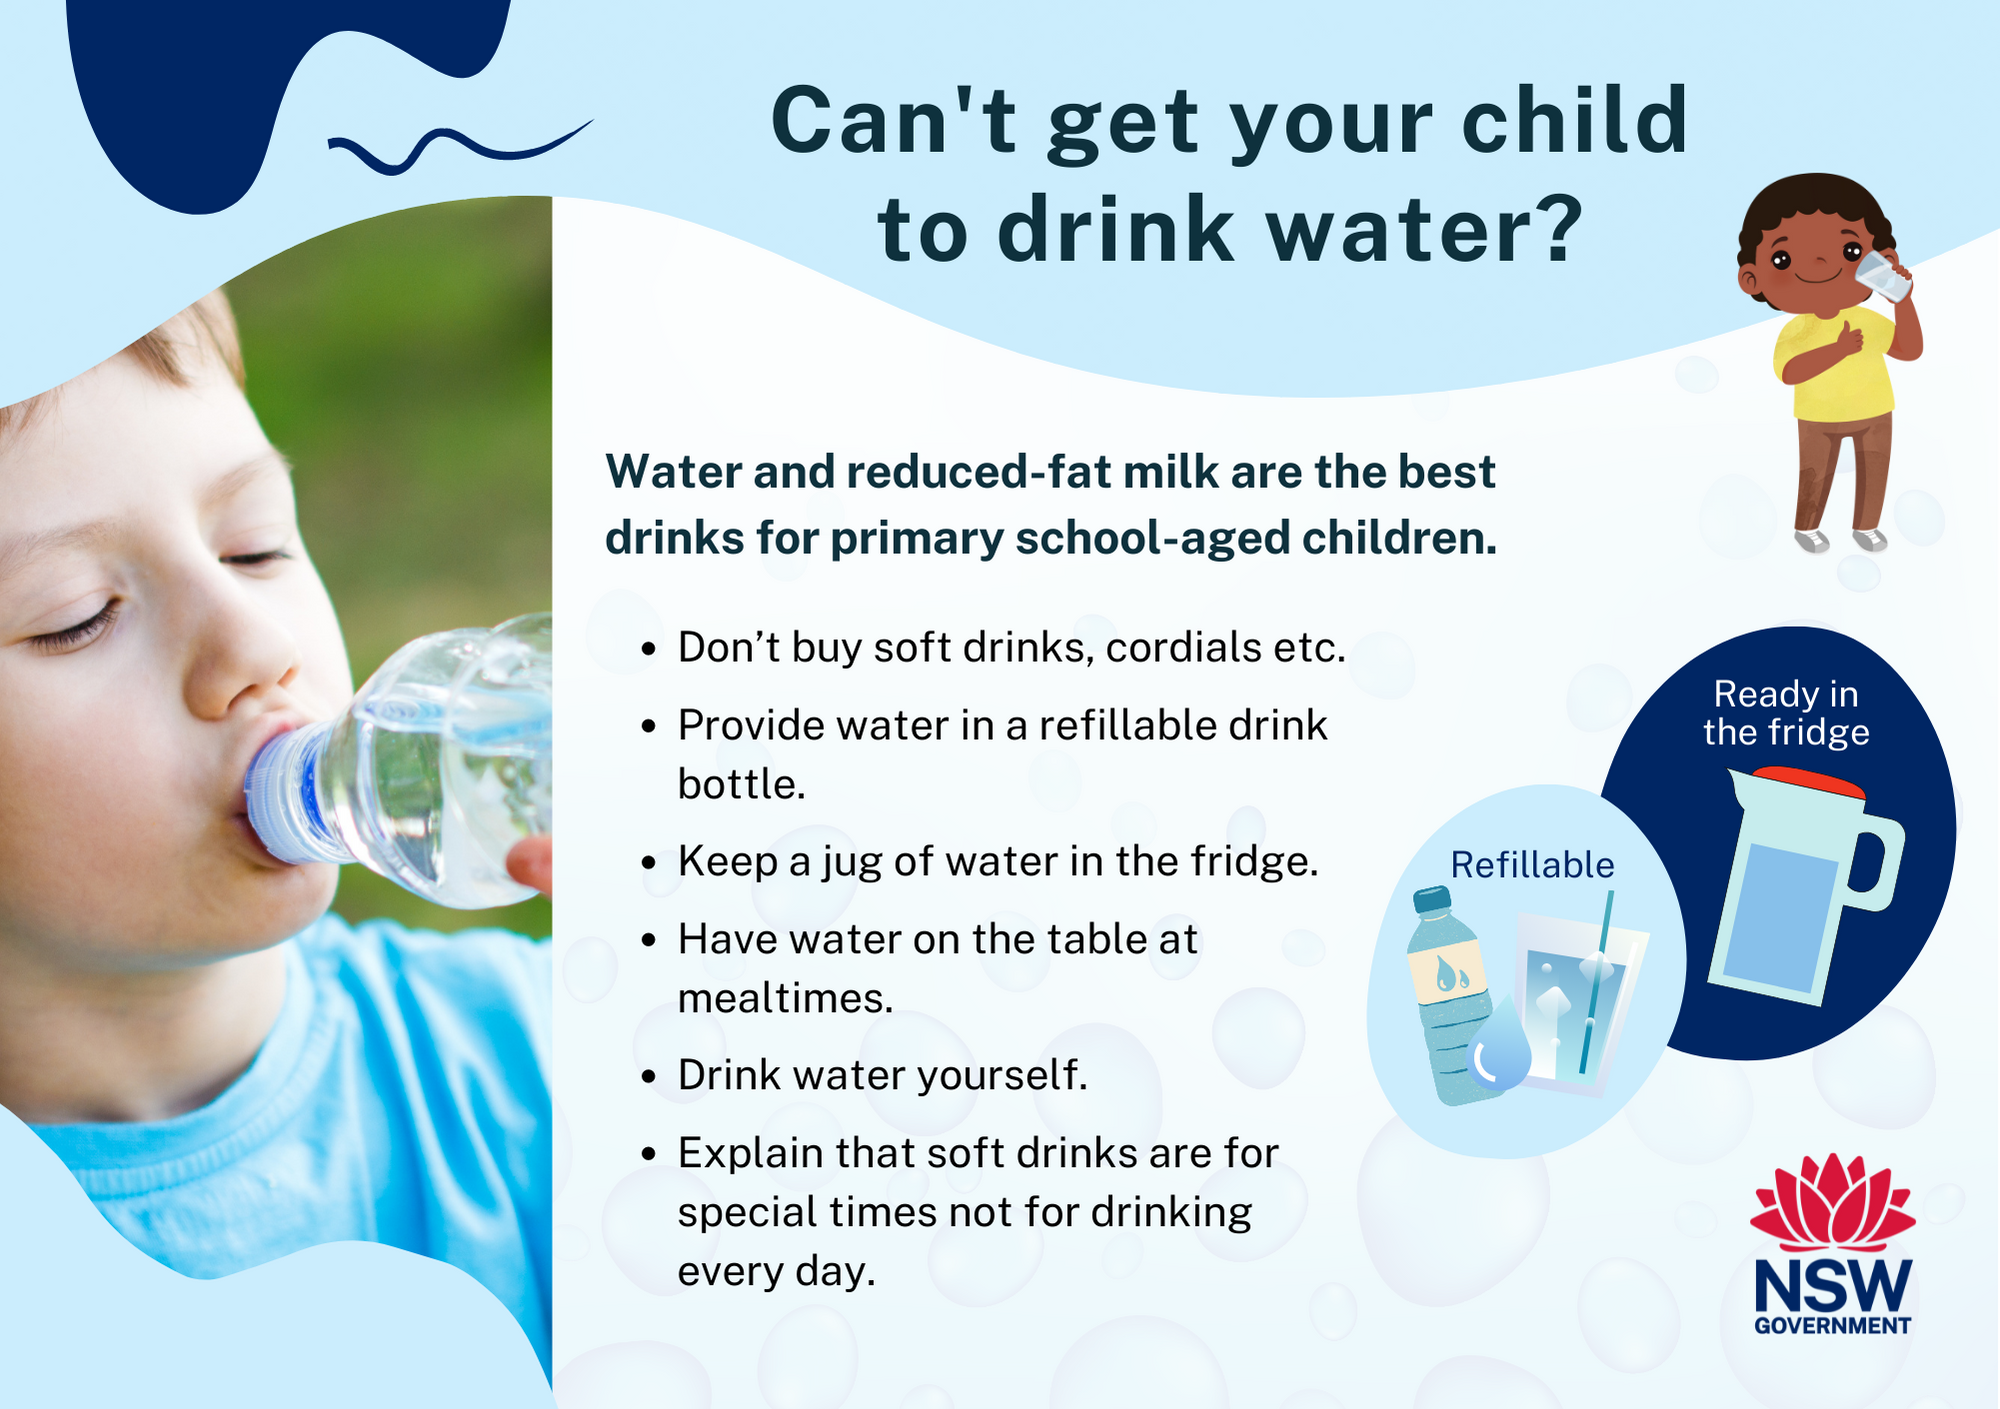 Can't get your child to drink water?